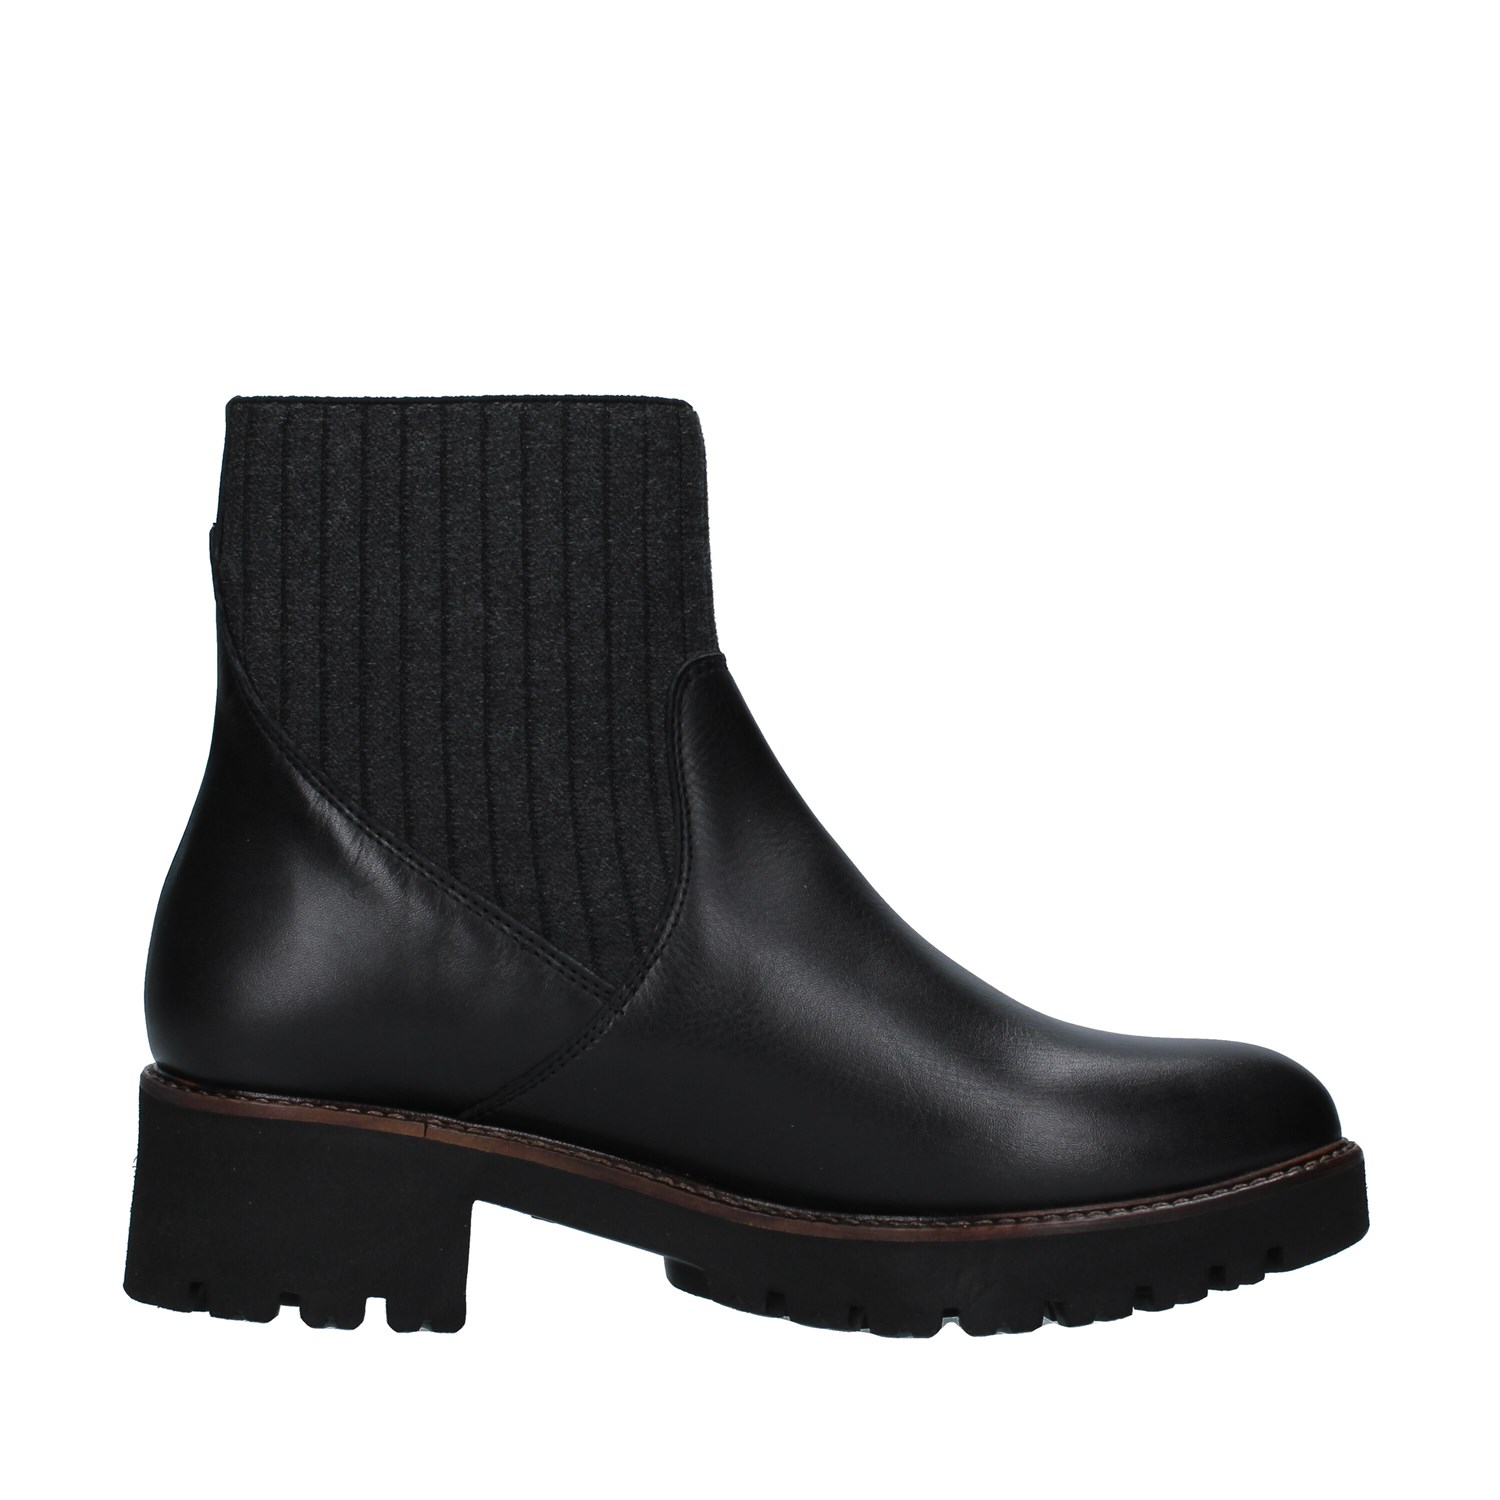 Callaghan Shoes Woman boots BLACK 13436